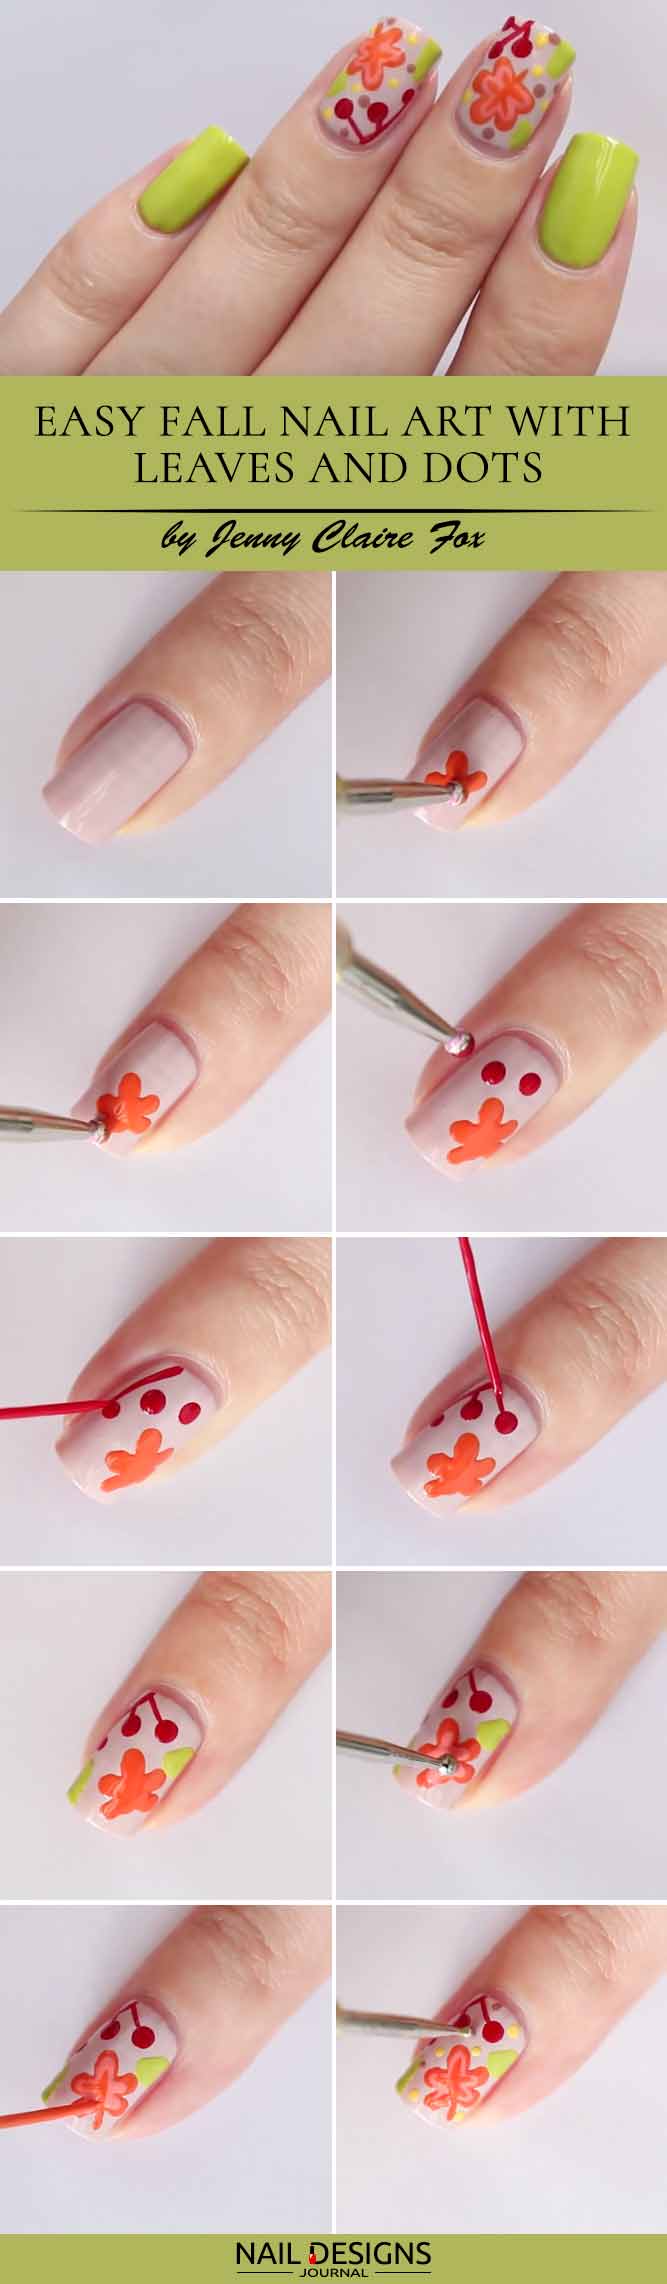 Easy Fall Nail Art with Leaves and Dots